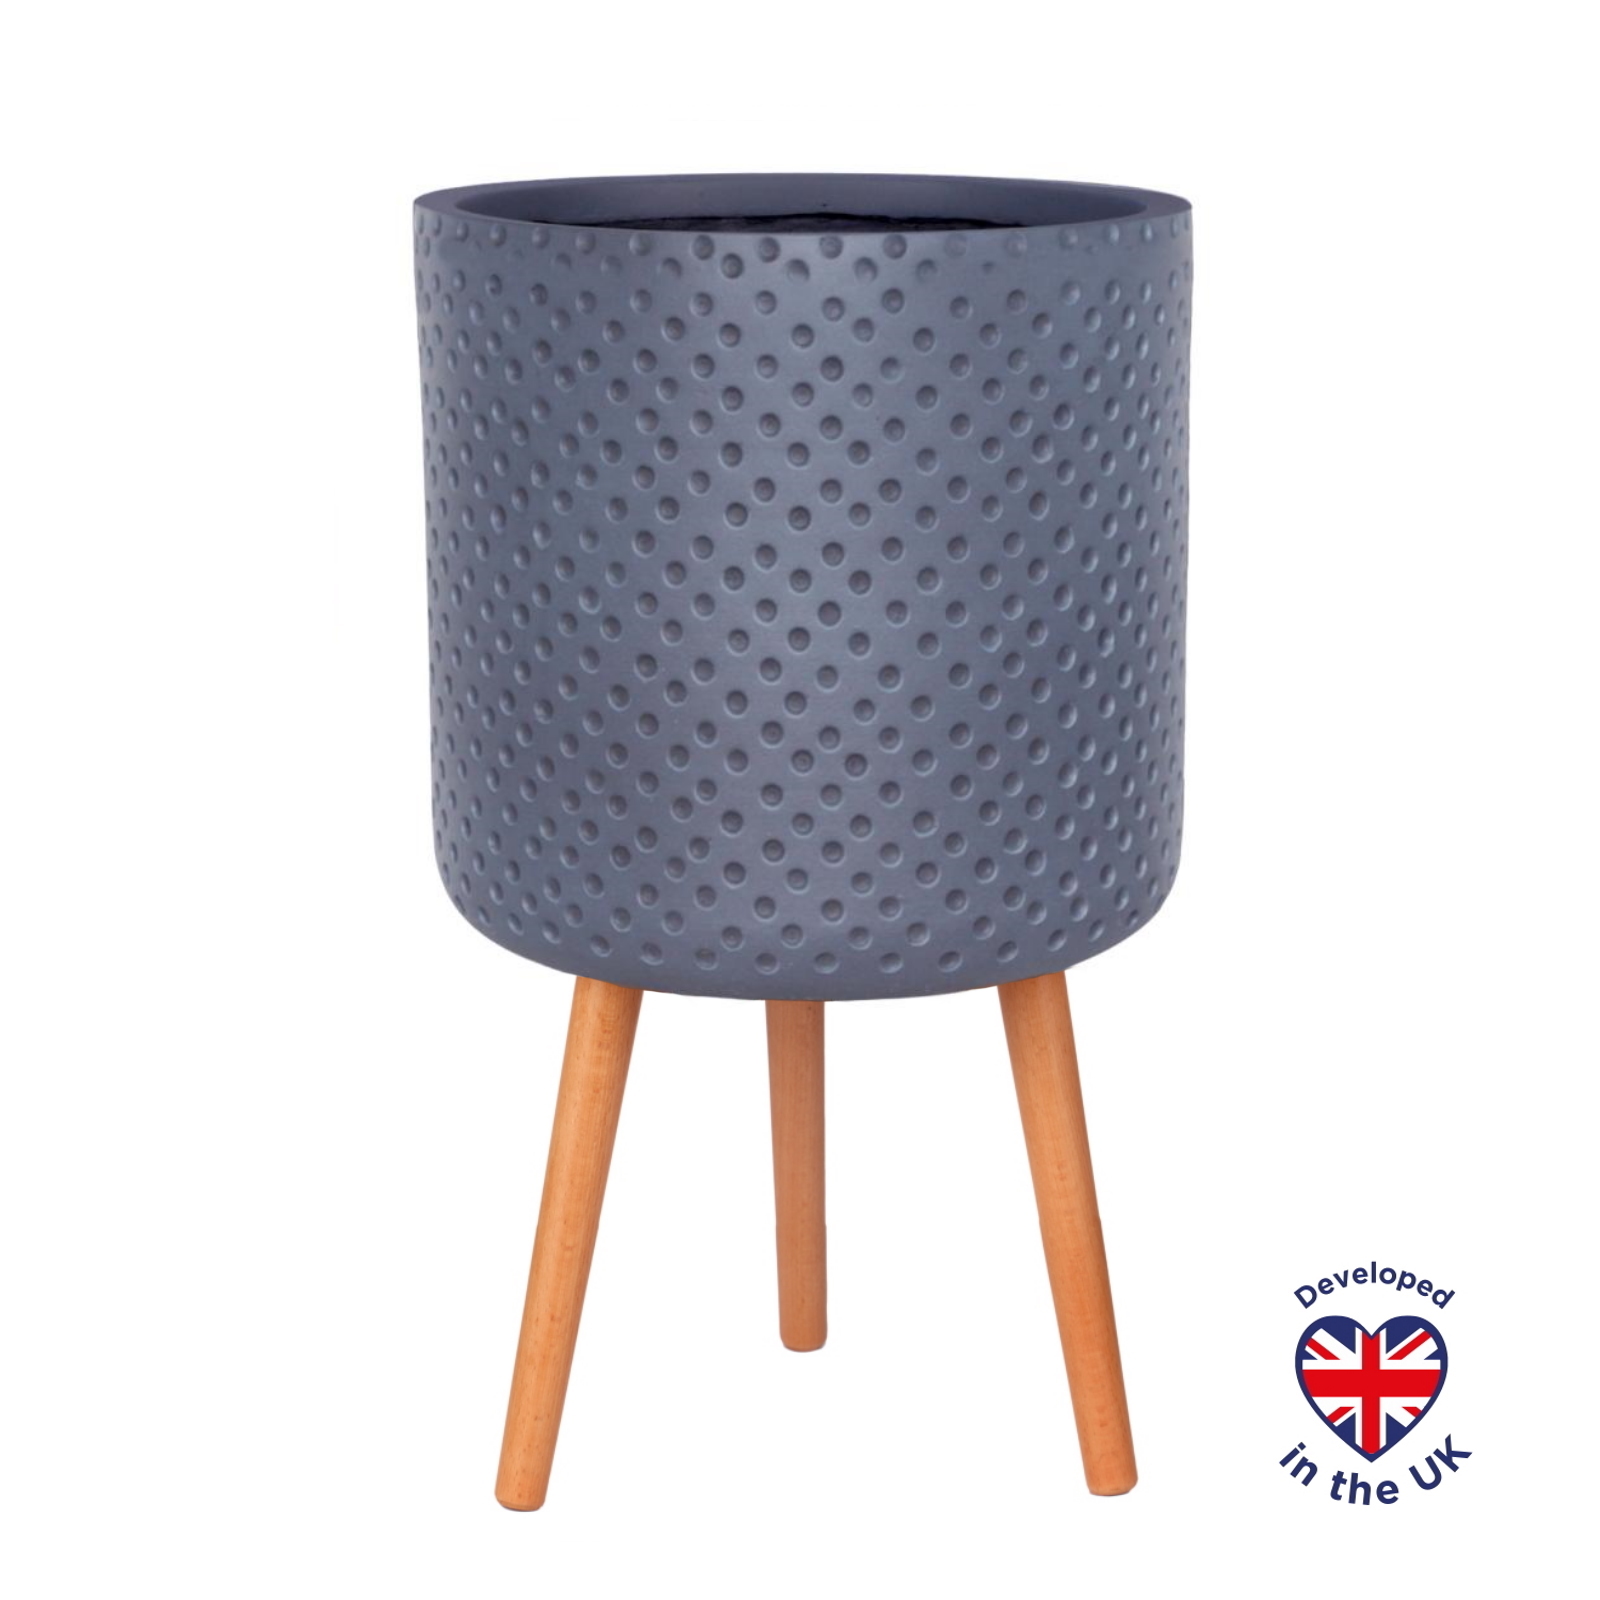 Dotted Style Grey Cylinder Indoor Planter with Legs D37.5 H62 cm, 32.7 ltrs Cap.